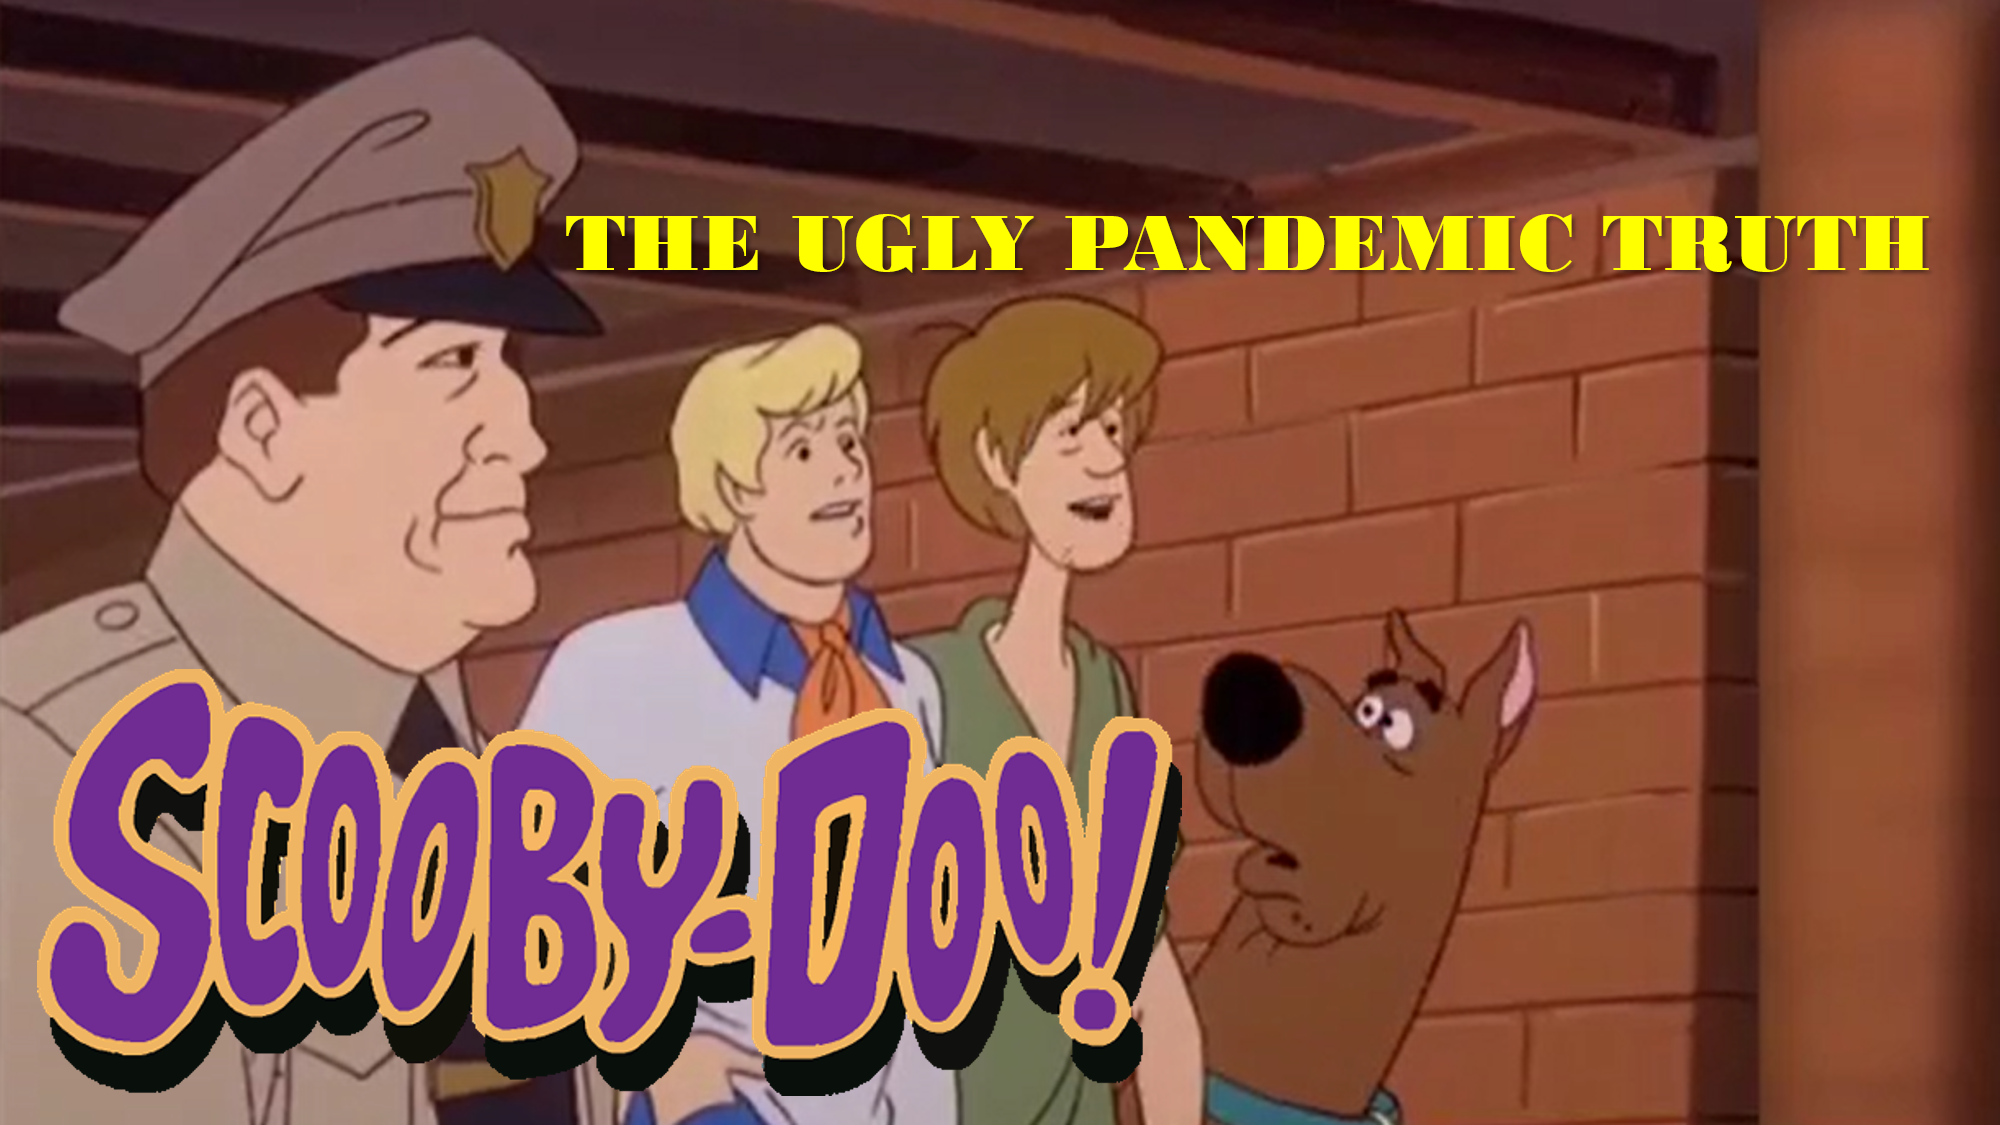 Scooby-Doo! The Ugly Pandemic Truth